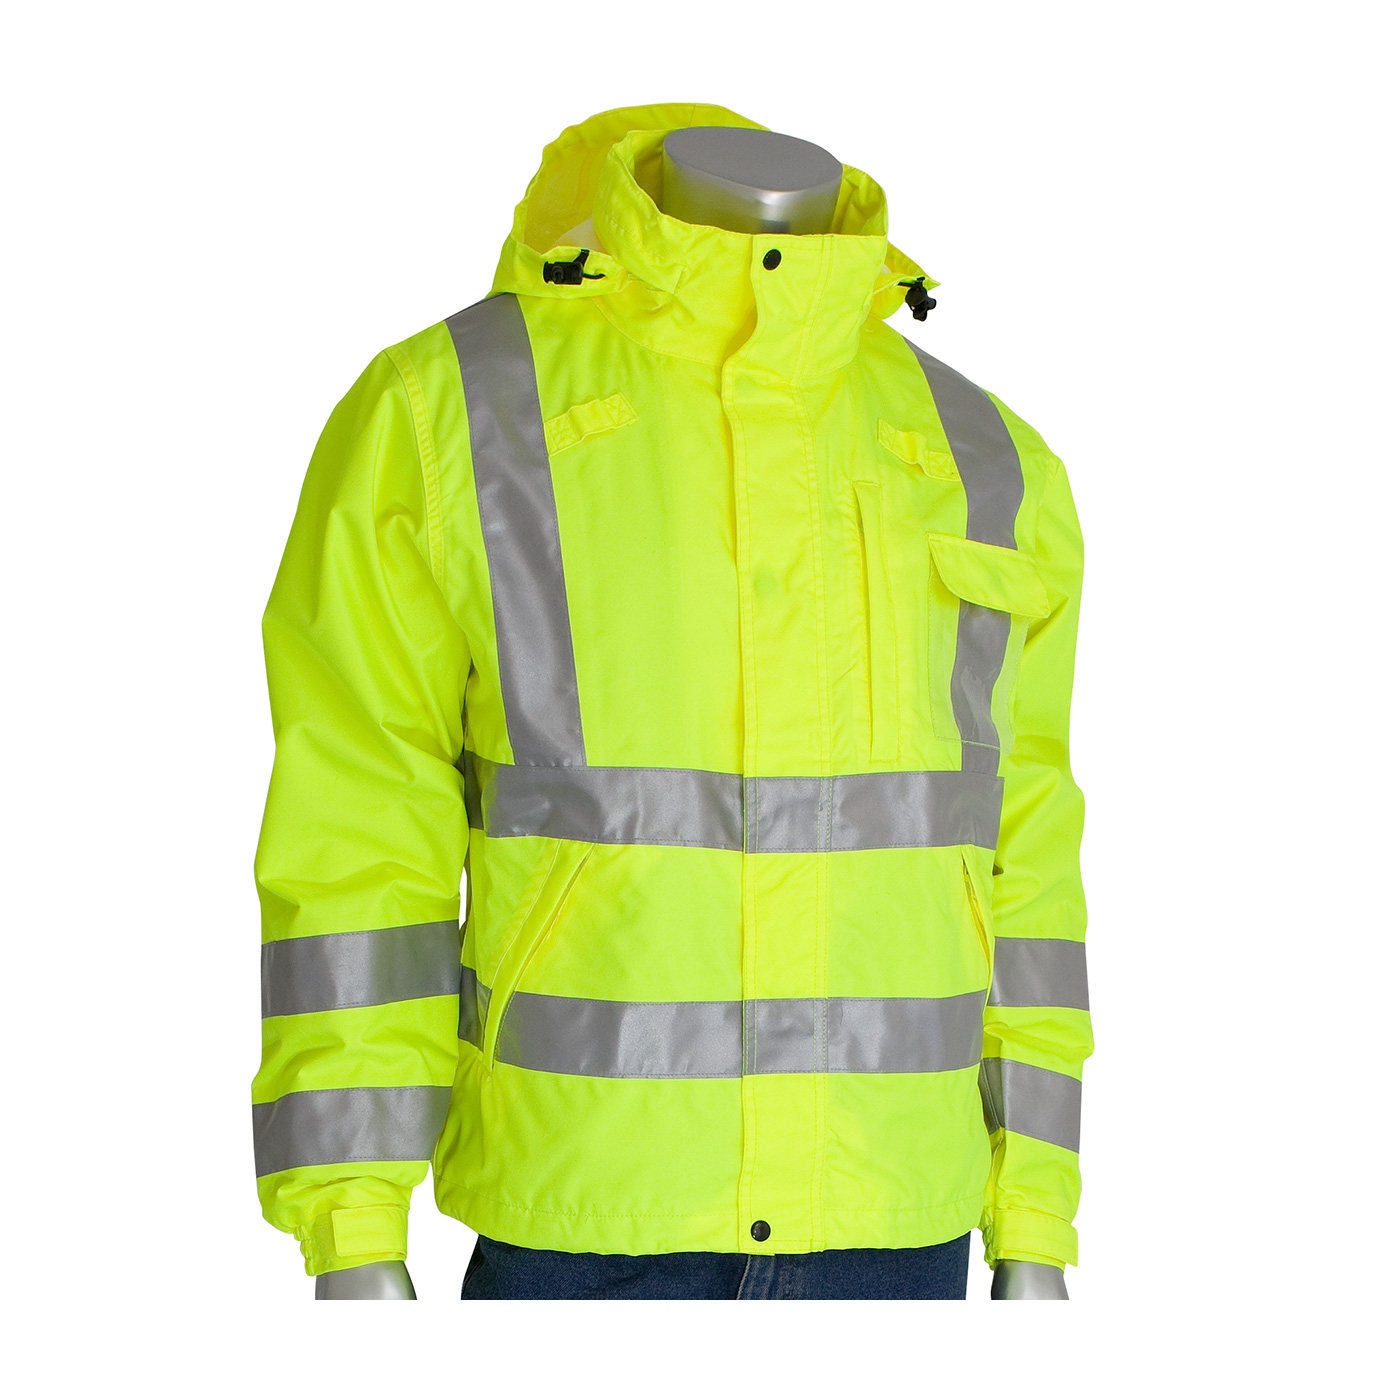 PIP VizPLUS Type R Class 3 Heavy Duty Waterproof Breathable Jacket from GME Supply